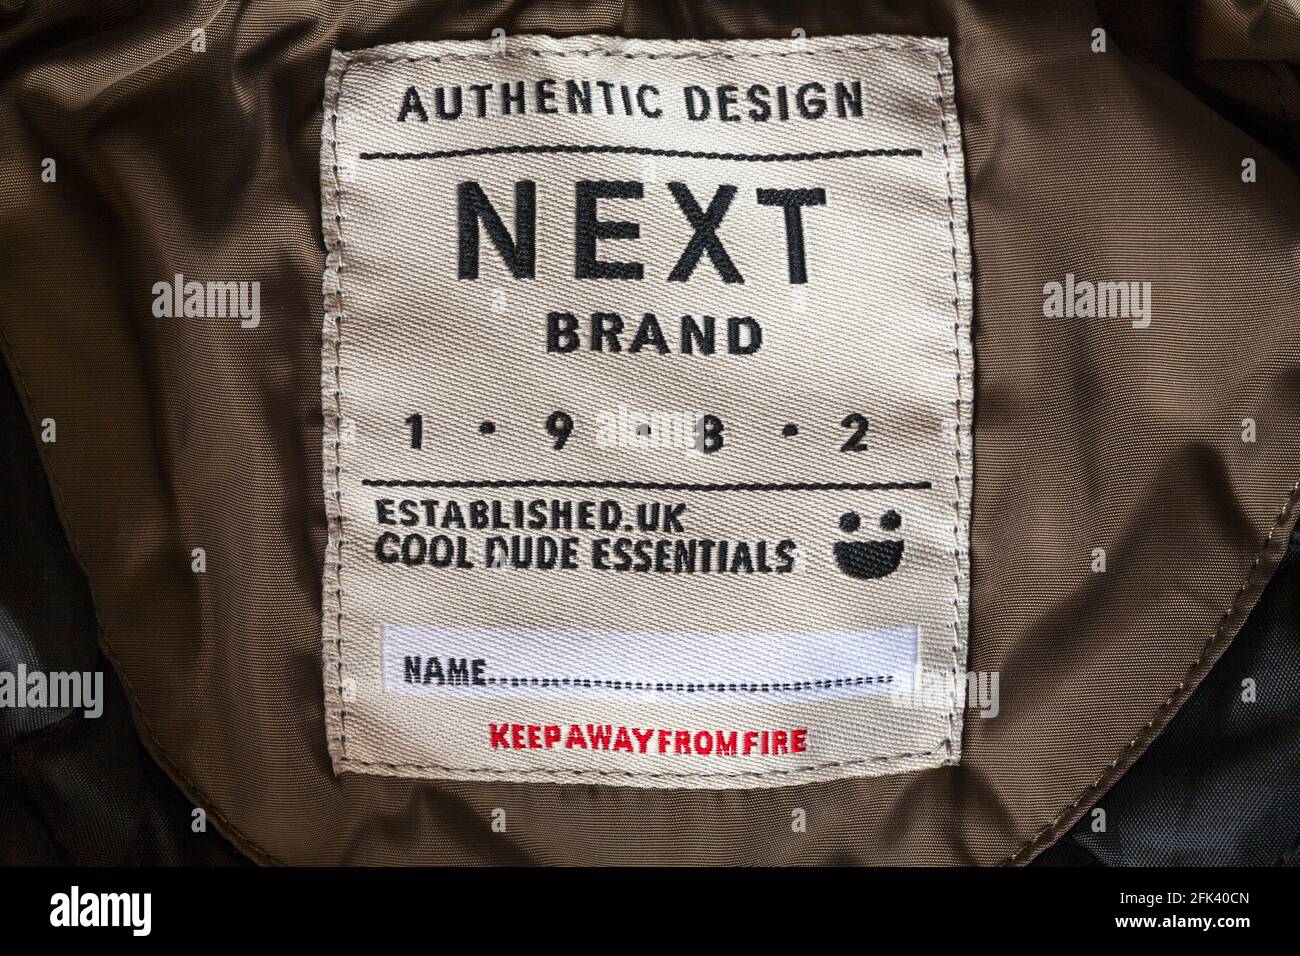 Next brand authentic design hi-res stock photography and images - Alamy